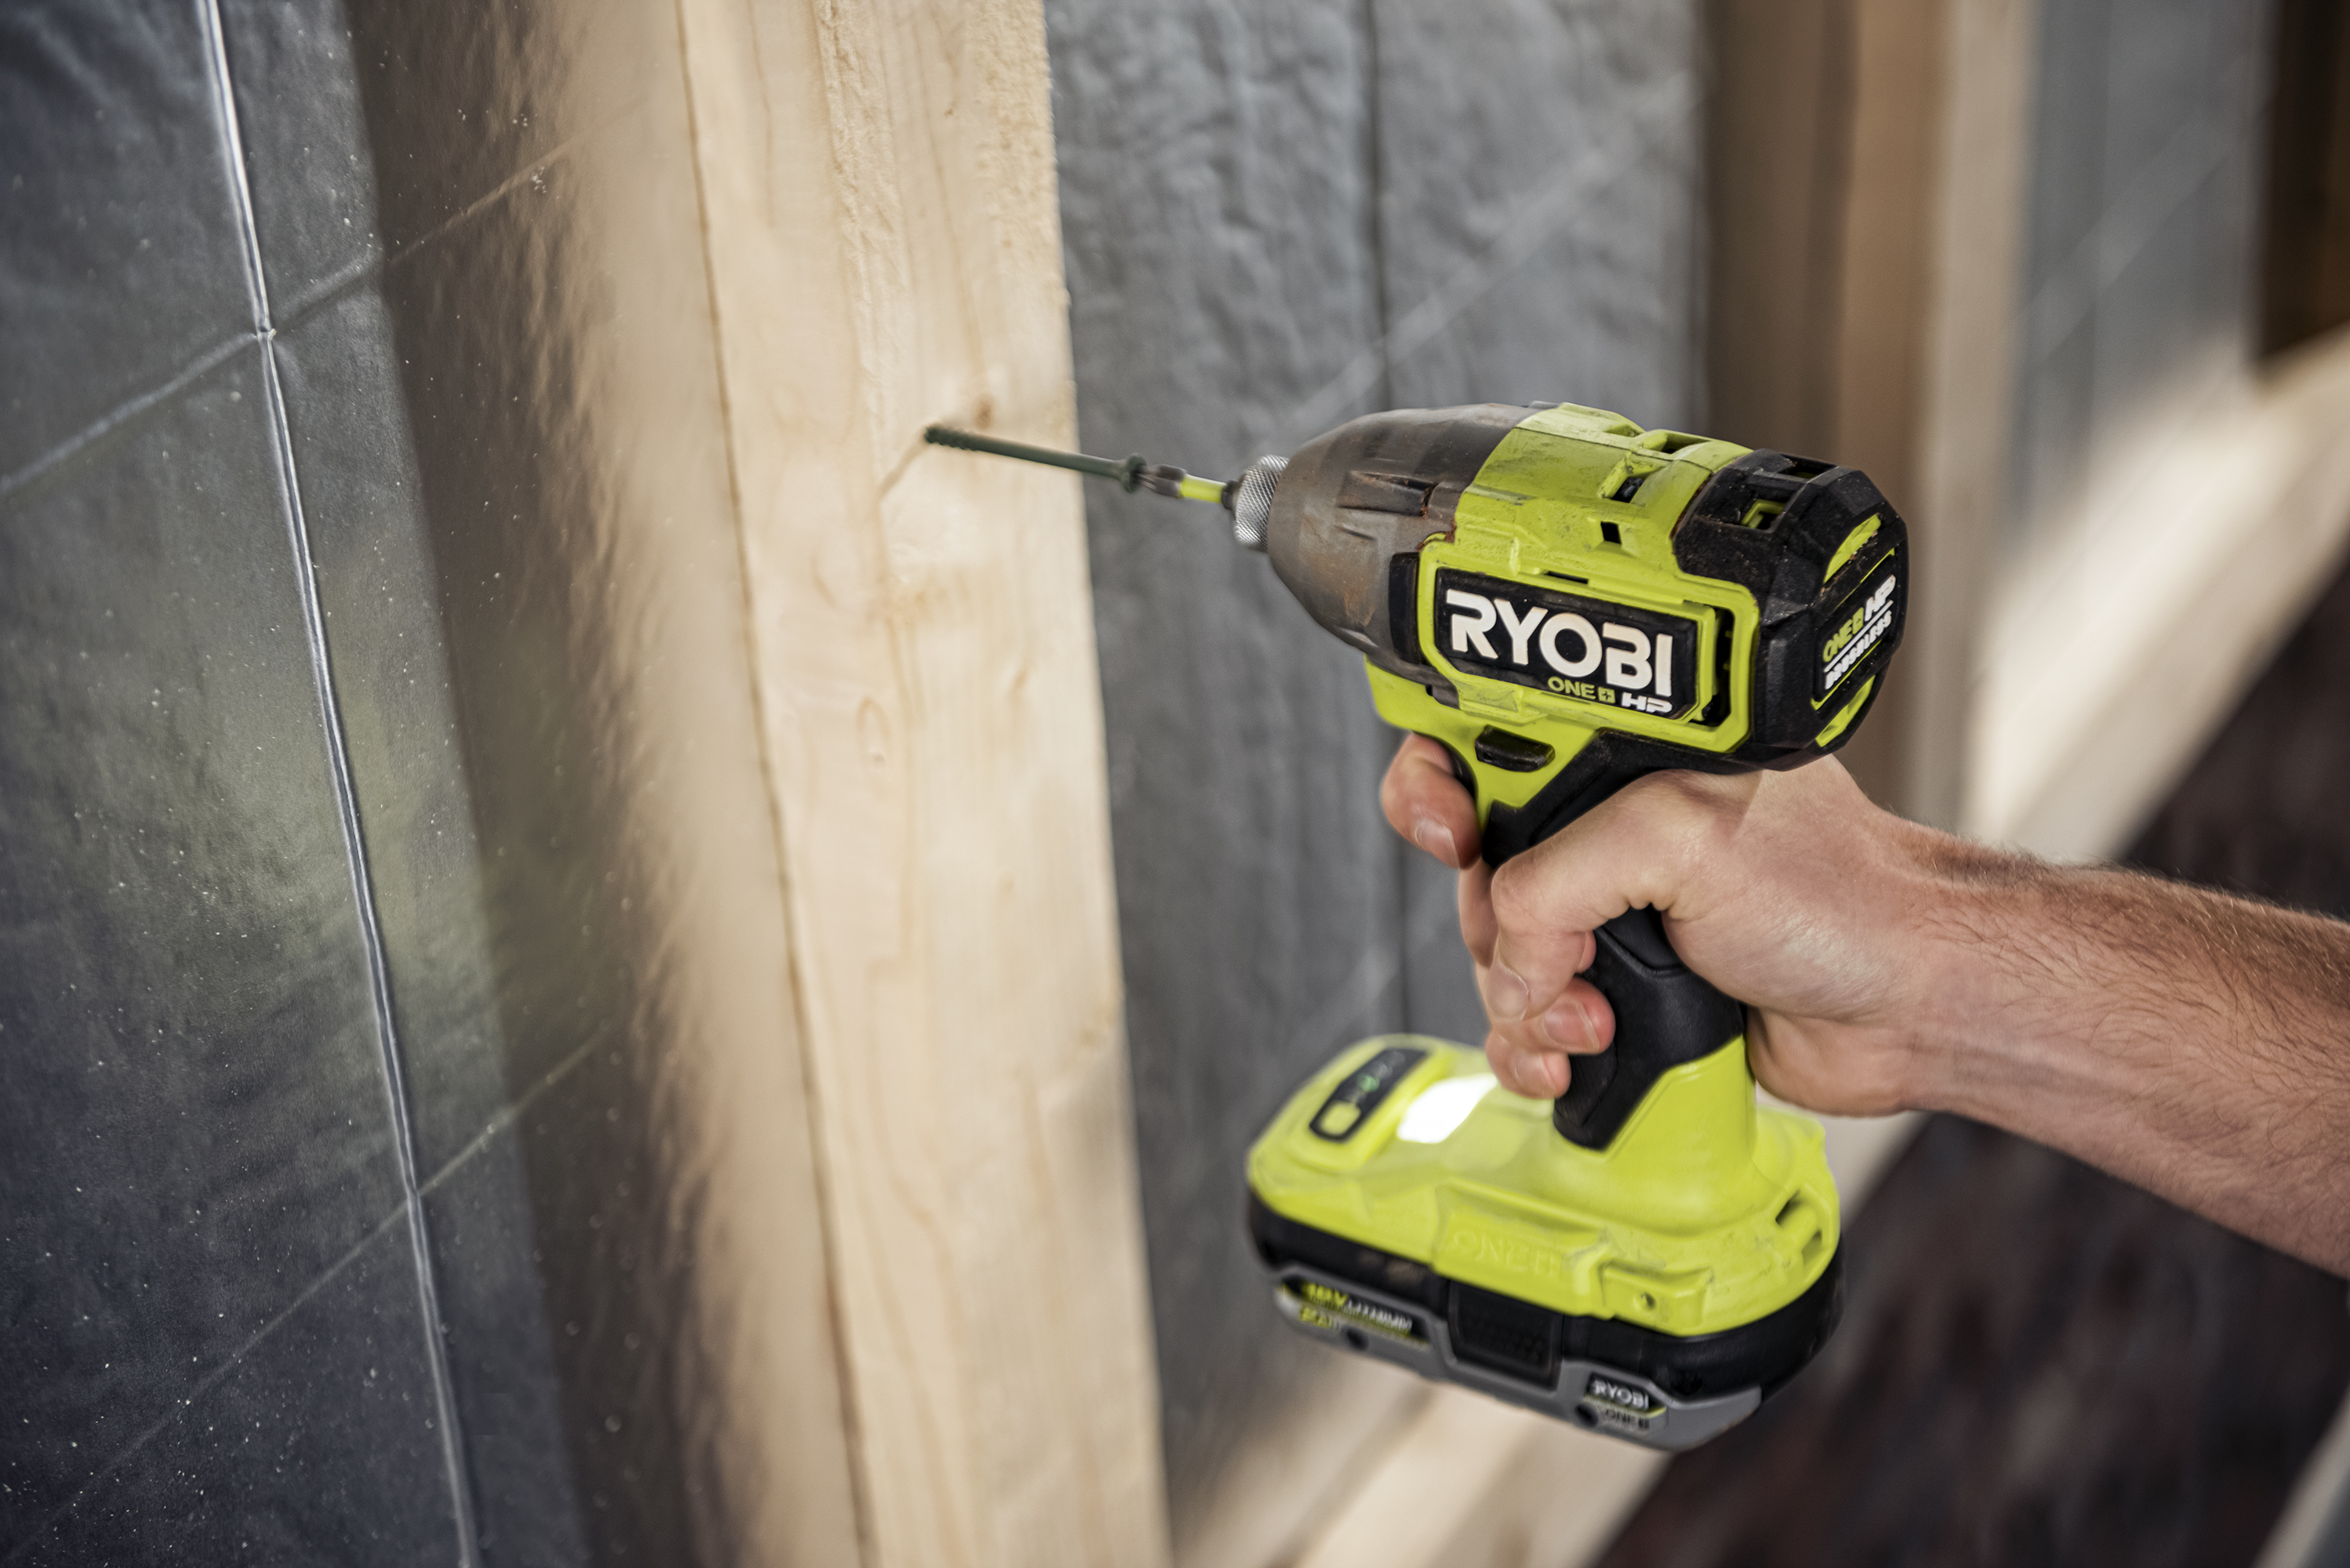 RYOBI ONE+ HP 18V Brushless Cordless 1/2 in. Hammer Drill Kit with (1) 4.0  Ah High Performance Battery, Charger, and Tool Bag